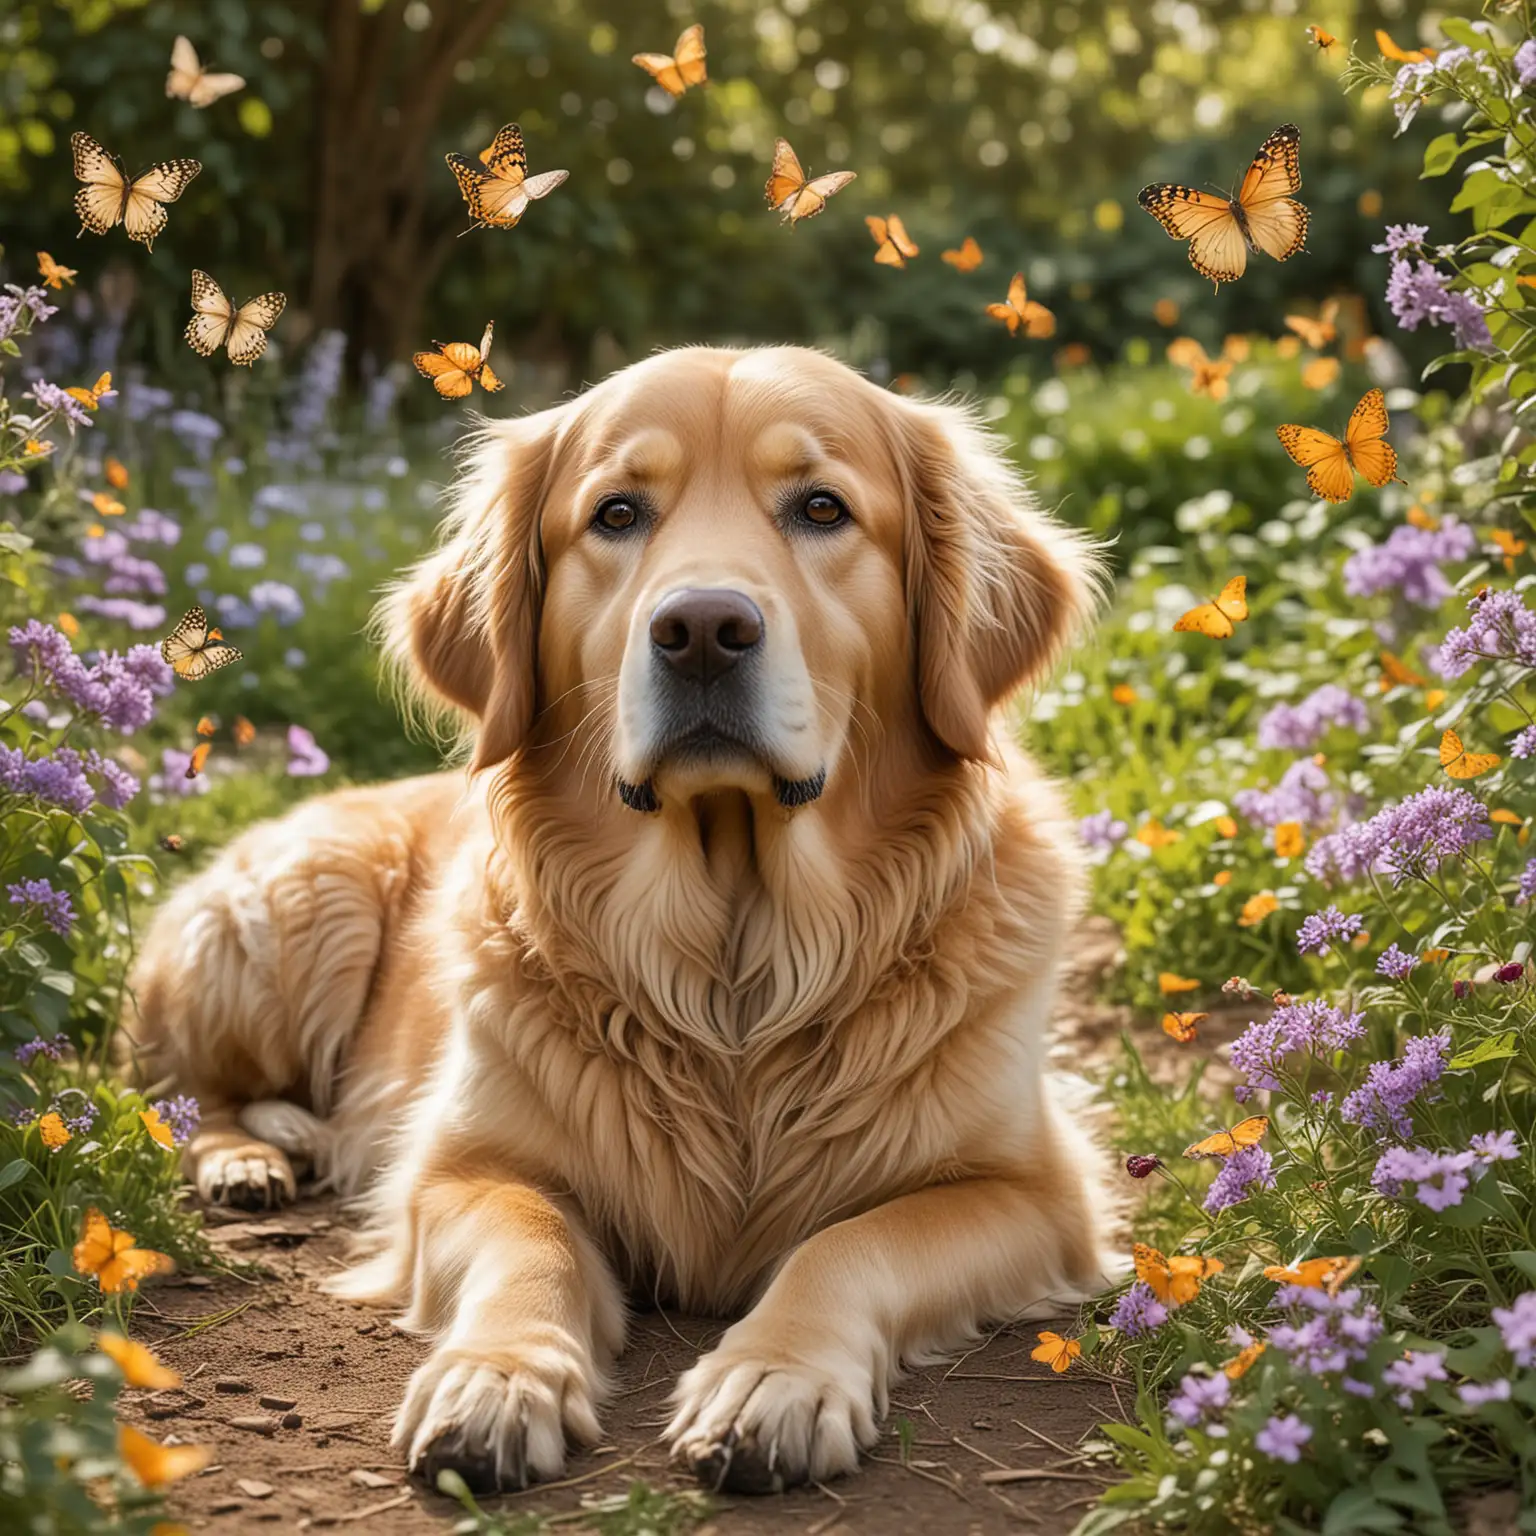 Golden Retriever lounging in a sunny park, with detailed fur and expressive eyes, surrounded by fluttering butterflies and blooming flowers; Style: wildlife photography, vibrant.